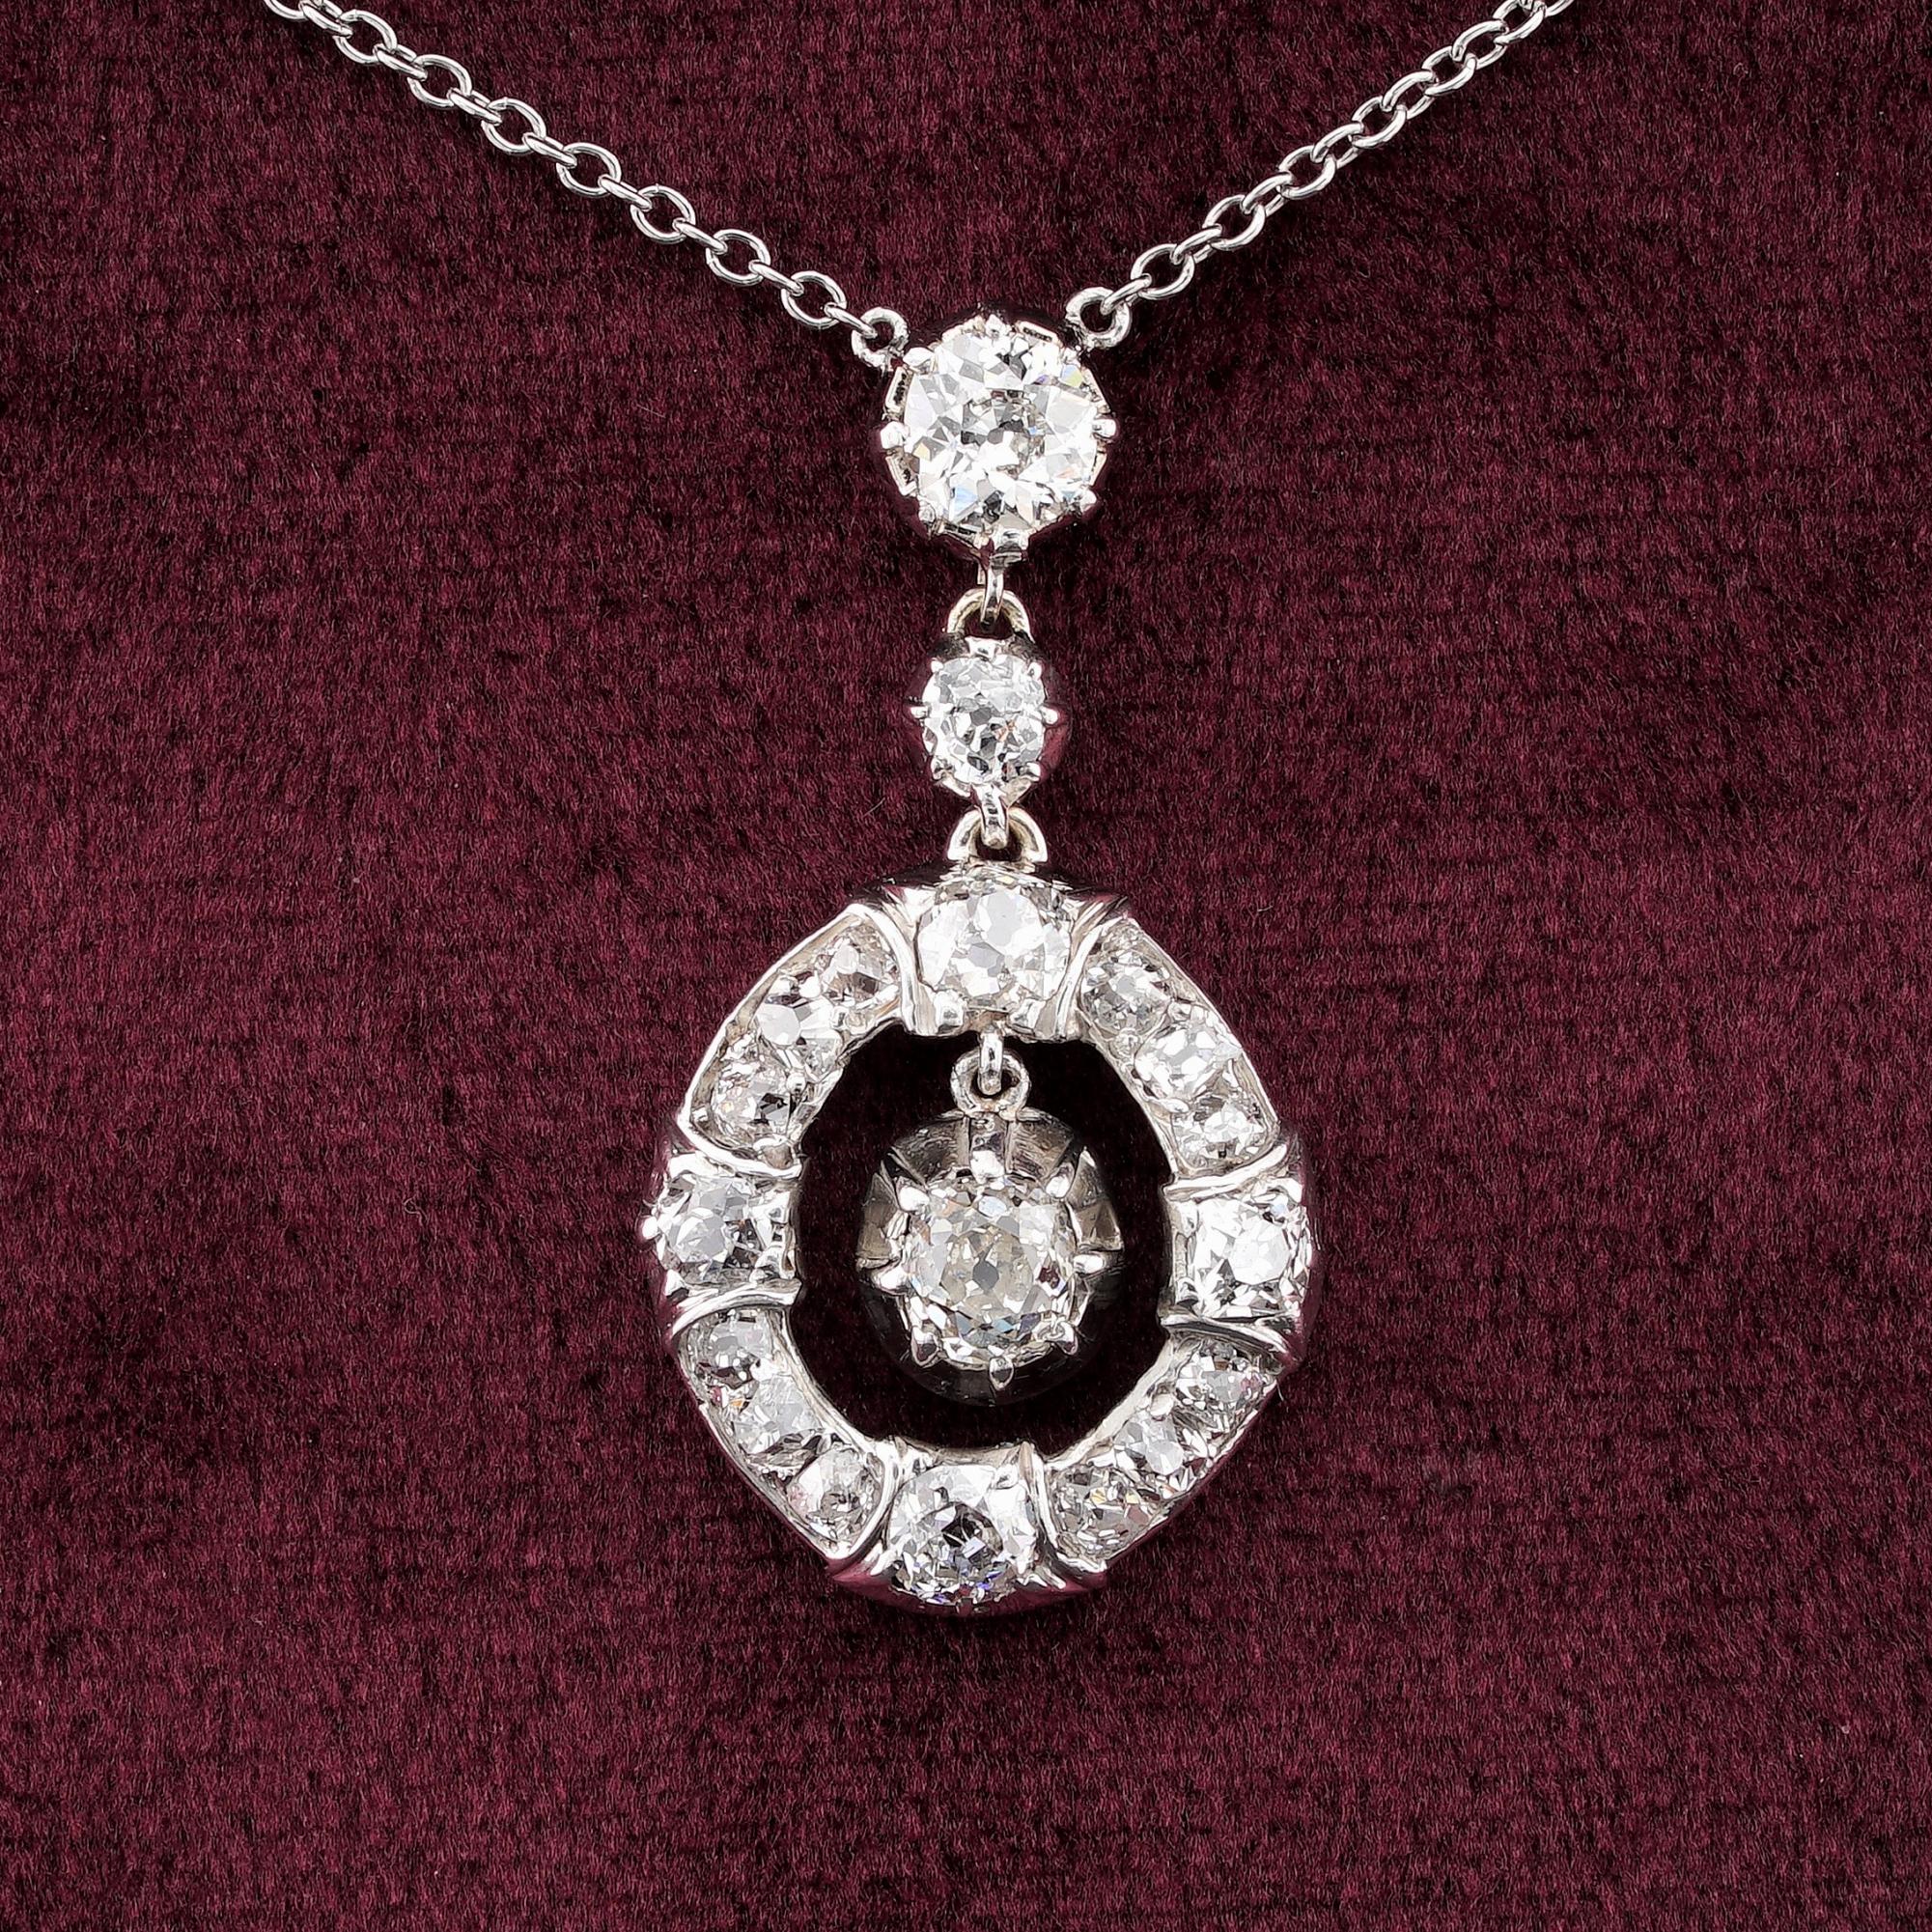 Glistening Diamond
This very charming antique Diamond pendant necklace is turn of last century, 1900/09 ca
Eye catching design of a bygone time
Elegant and timeless, full of glistening Diamonds, white and sparkly to catching the attention at any